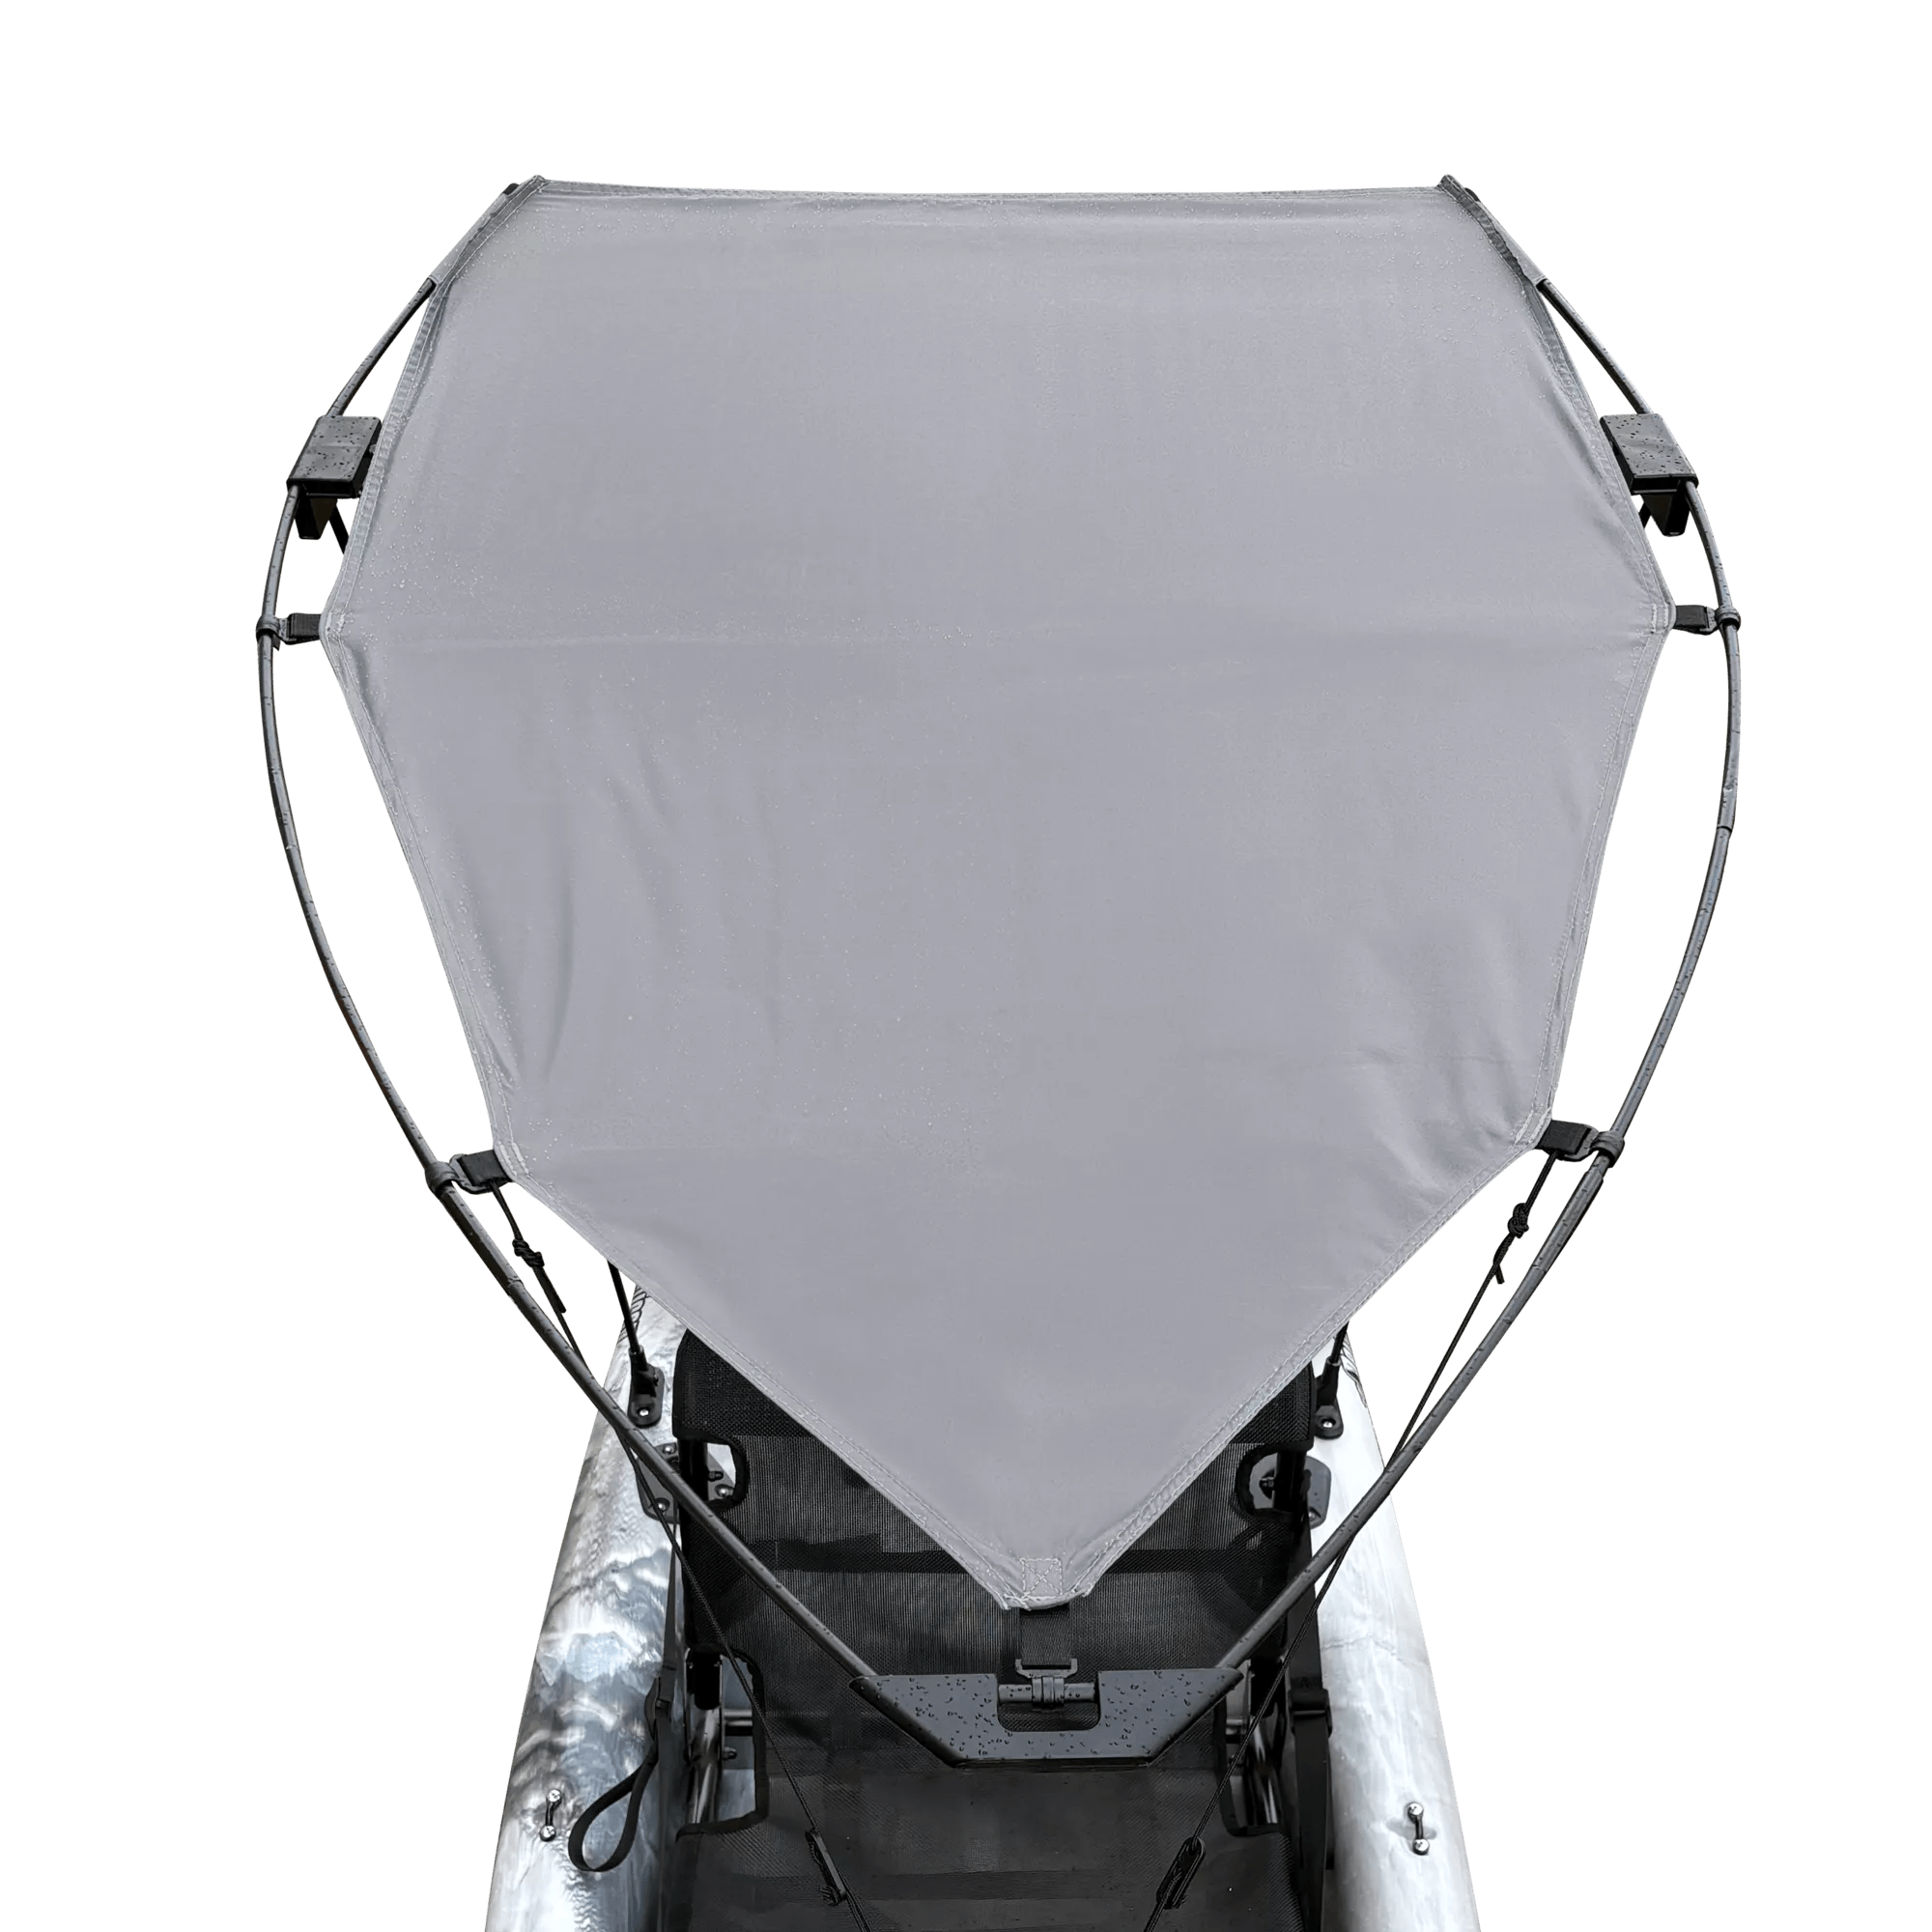 PELICAN - Kayak Canopy -  - PS3053-00 - LIFE STYLE 1